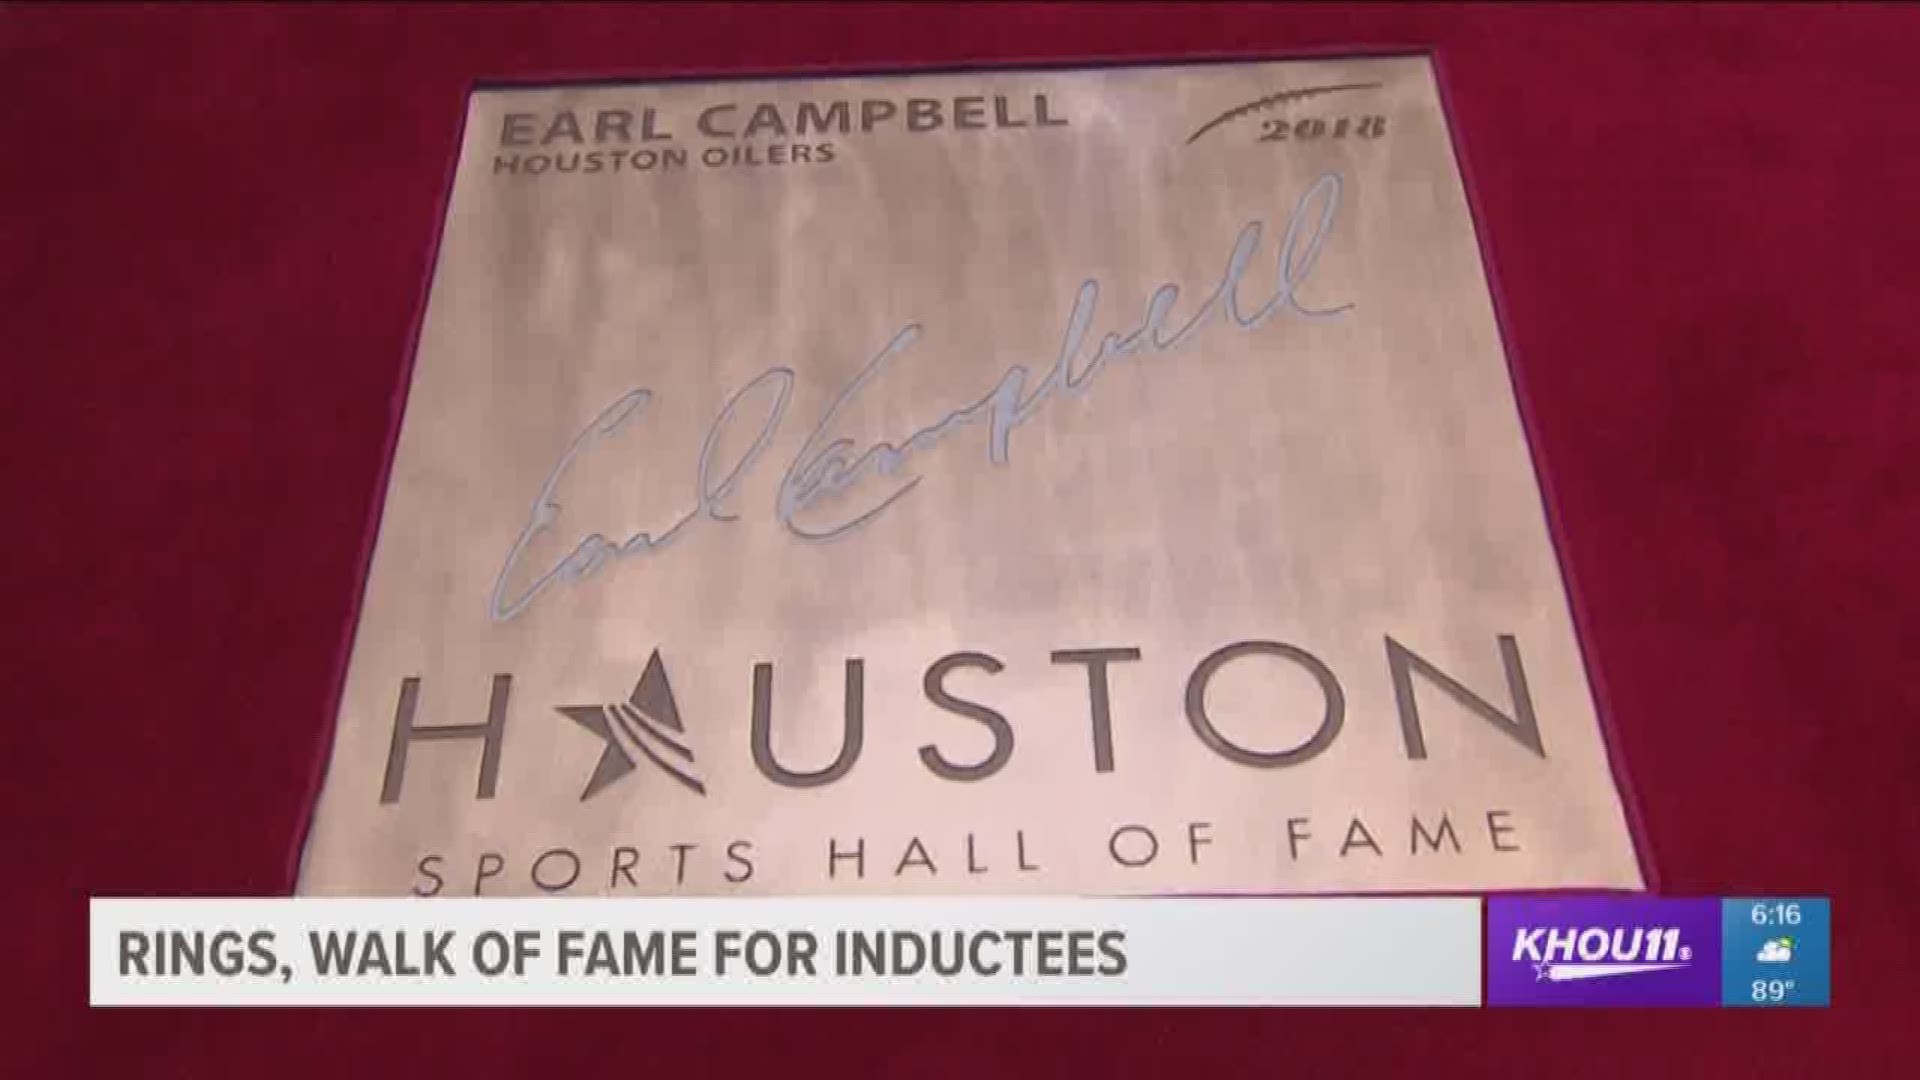 Earl Campbell, Hakeem Olajuwon and Nolan Ryan received rings and their names on a walkway in downtown Houston as the first inductees into the Houston Sports Hall of Fame.